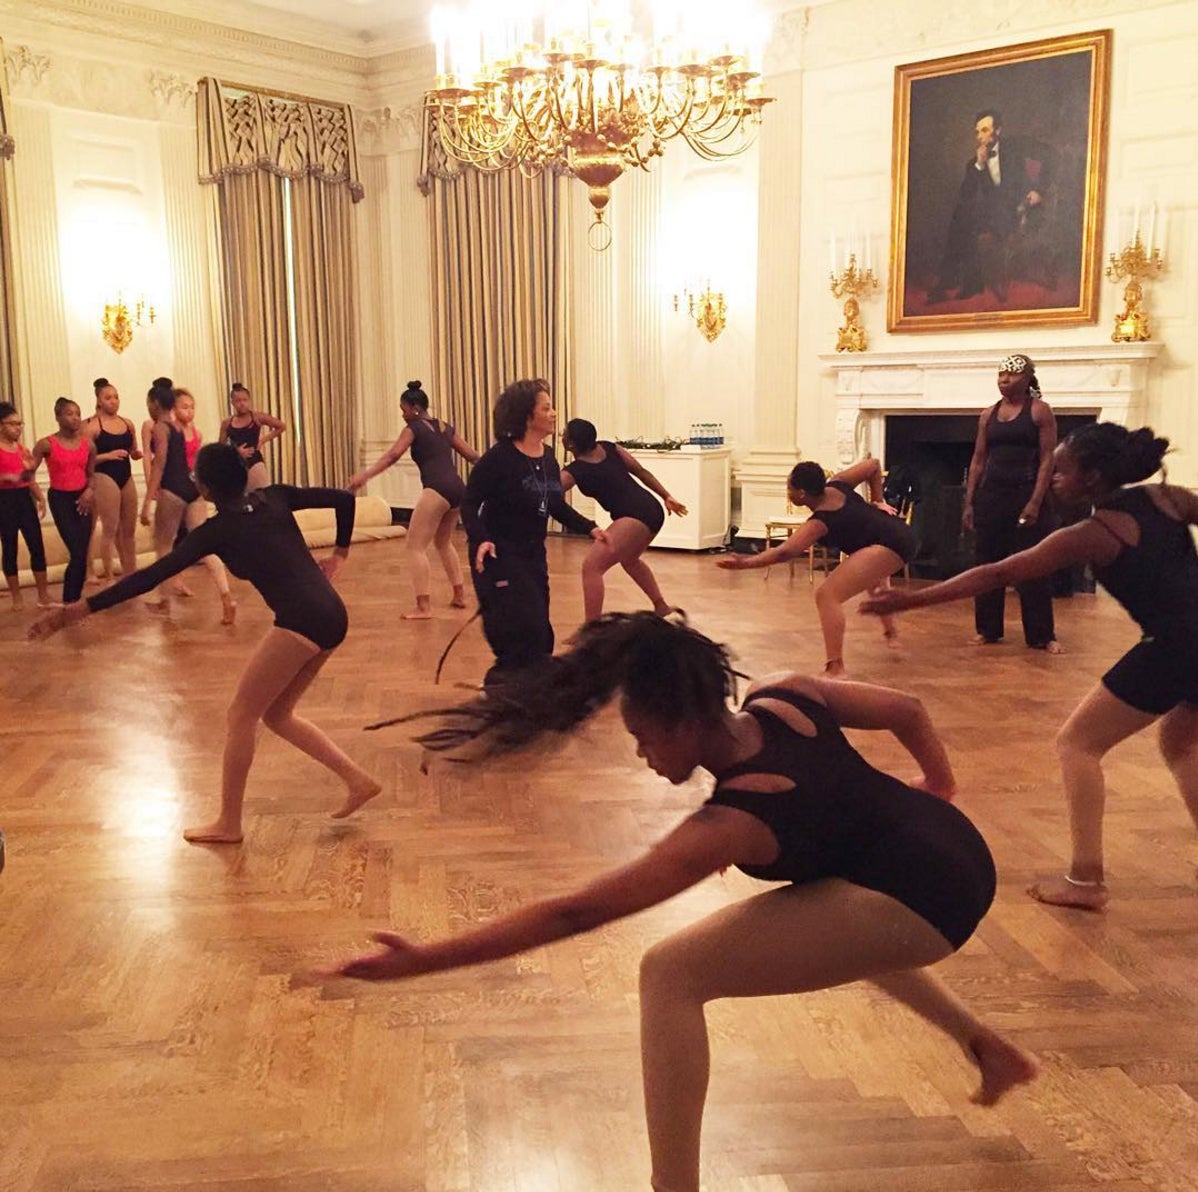 Michelle Obama Brings African Dance Classes to the White House
